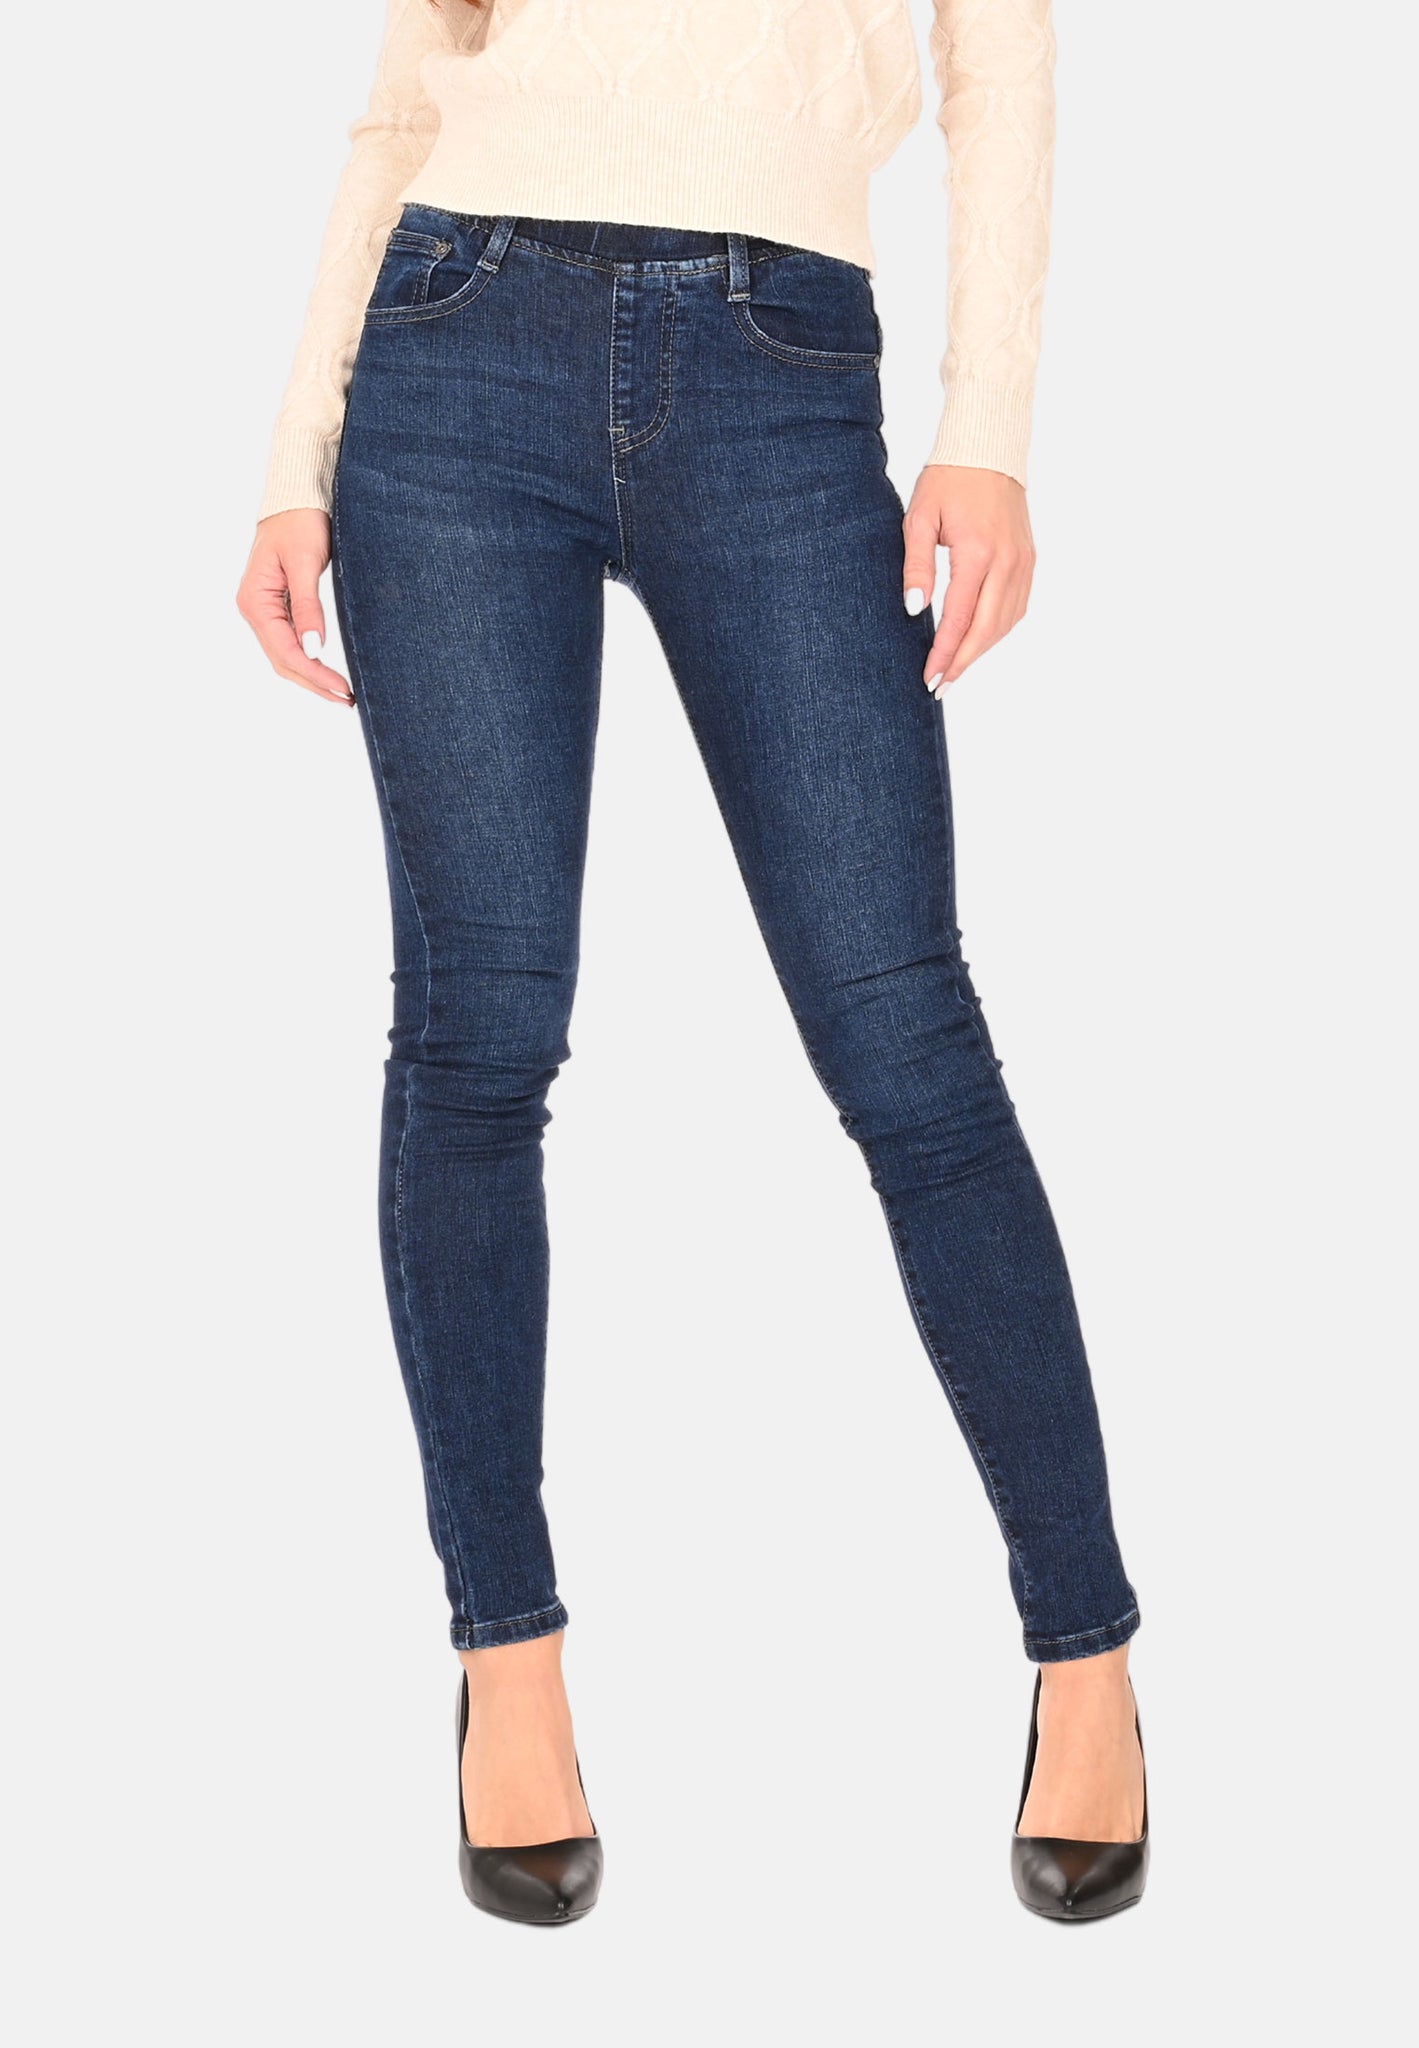 Jeans with elastic waist